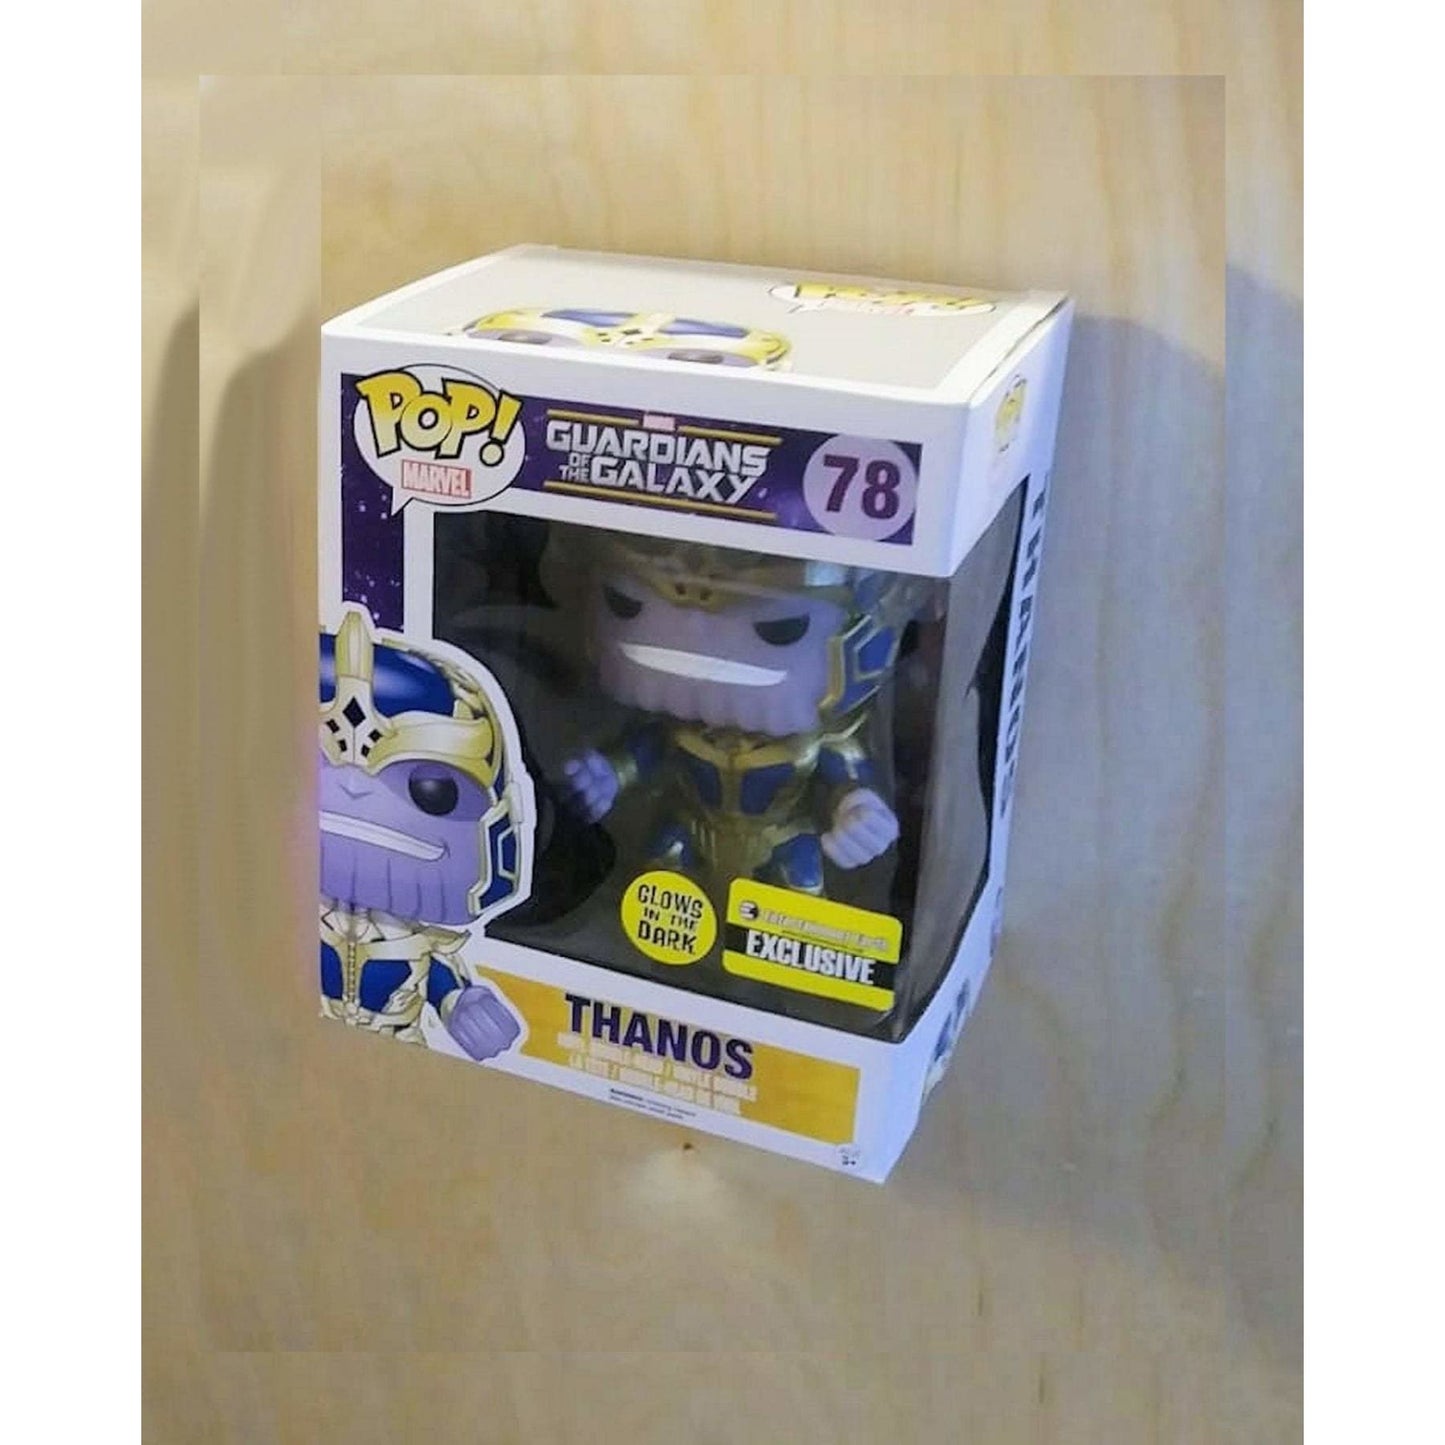 For 6" Boxed Funko Pop Vinyl: Clear Acrylic Wall Stand, Stick On, Single Floating Shelf less